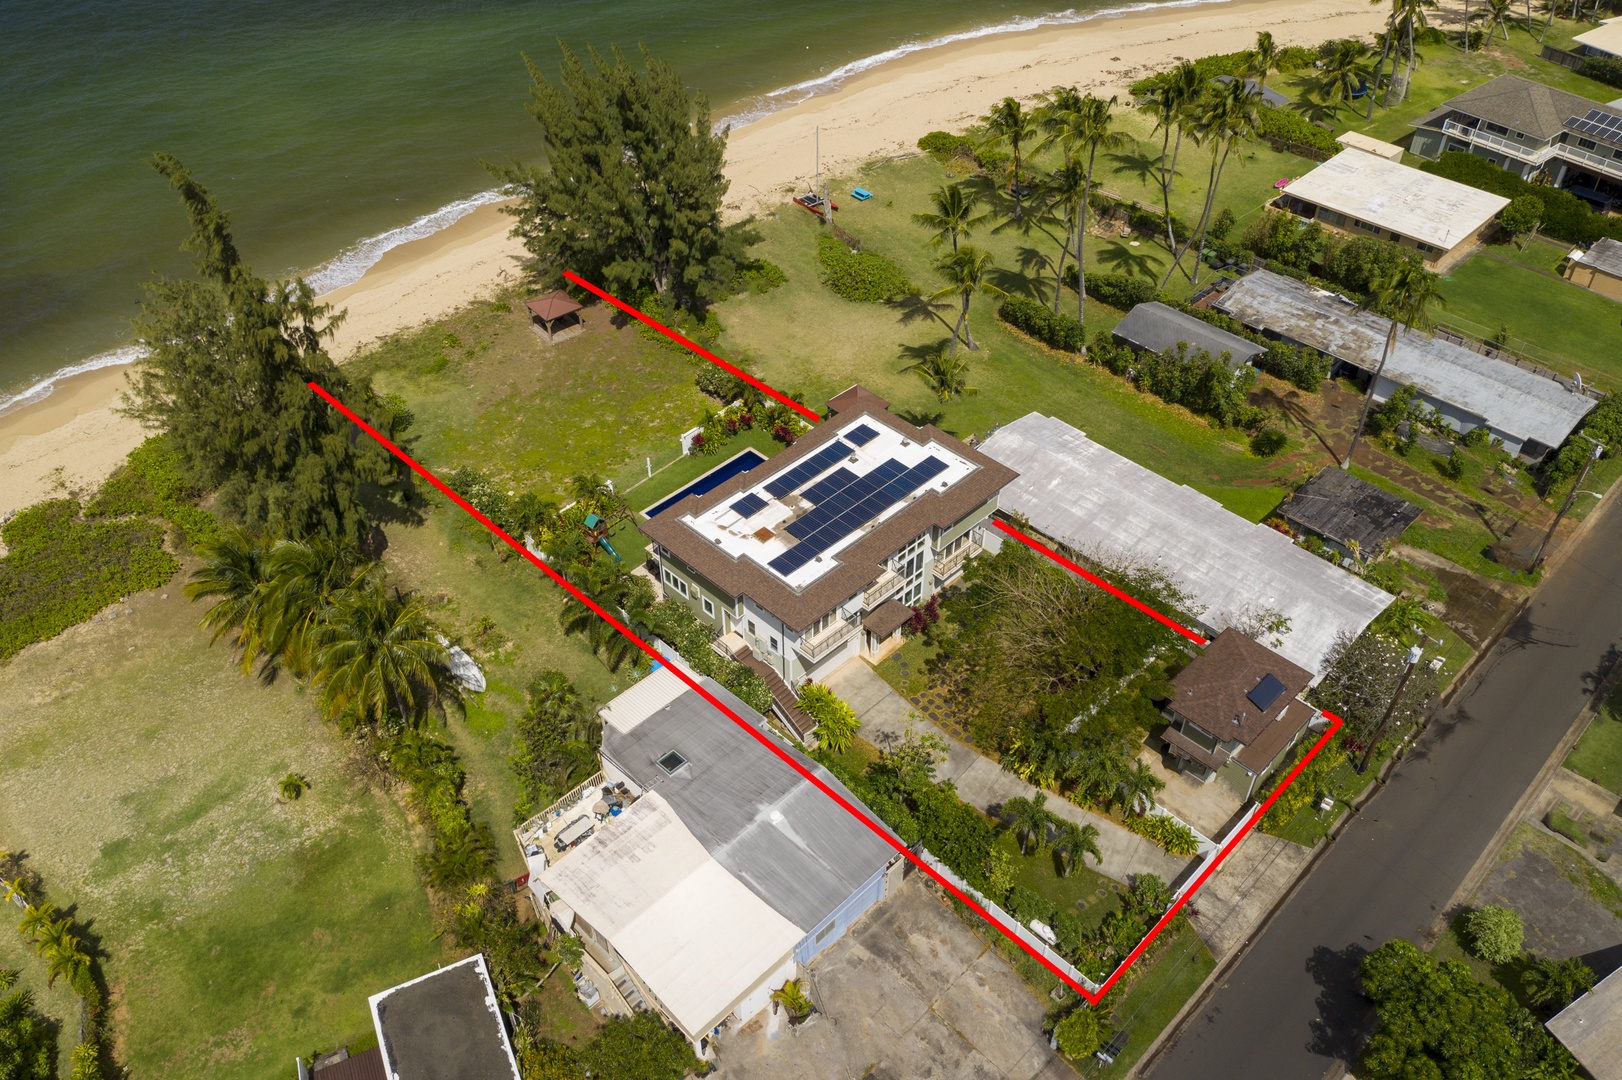 Waialua Vacation Rentals, Kala'iku* - Another aerial view, showing the home's beach access.